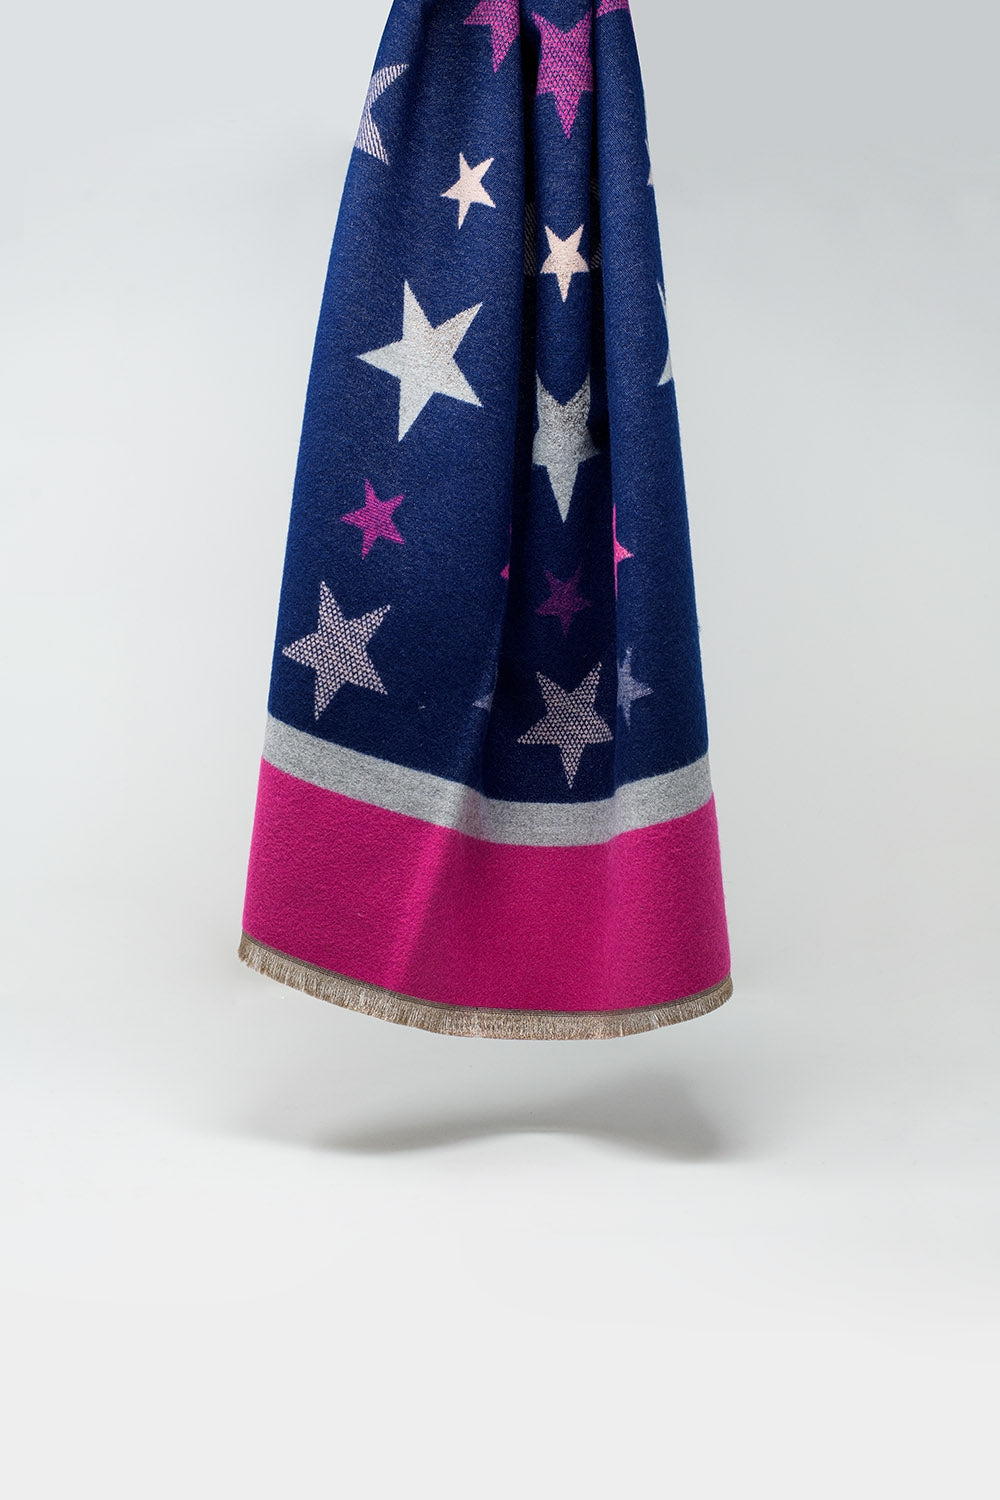 Q2 Lightweight Scarf with Stripes and Stars in Shades of Blue and Pink